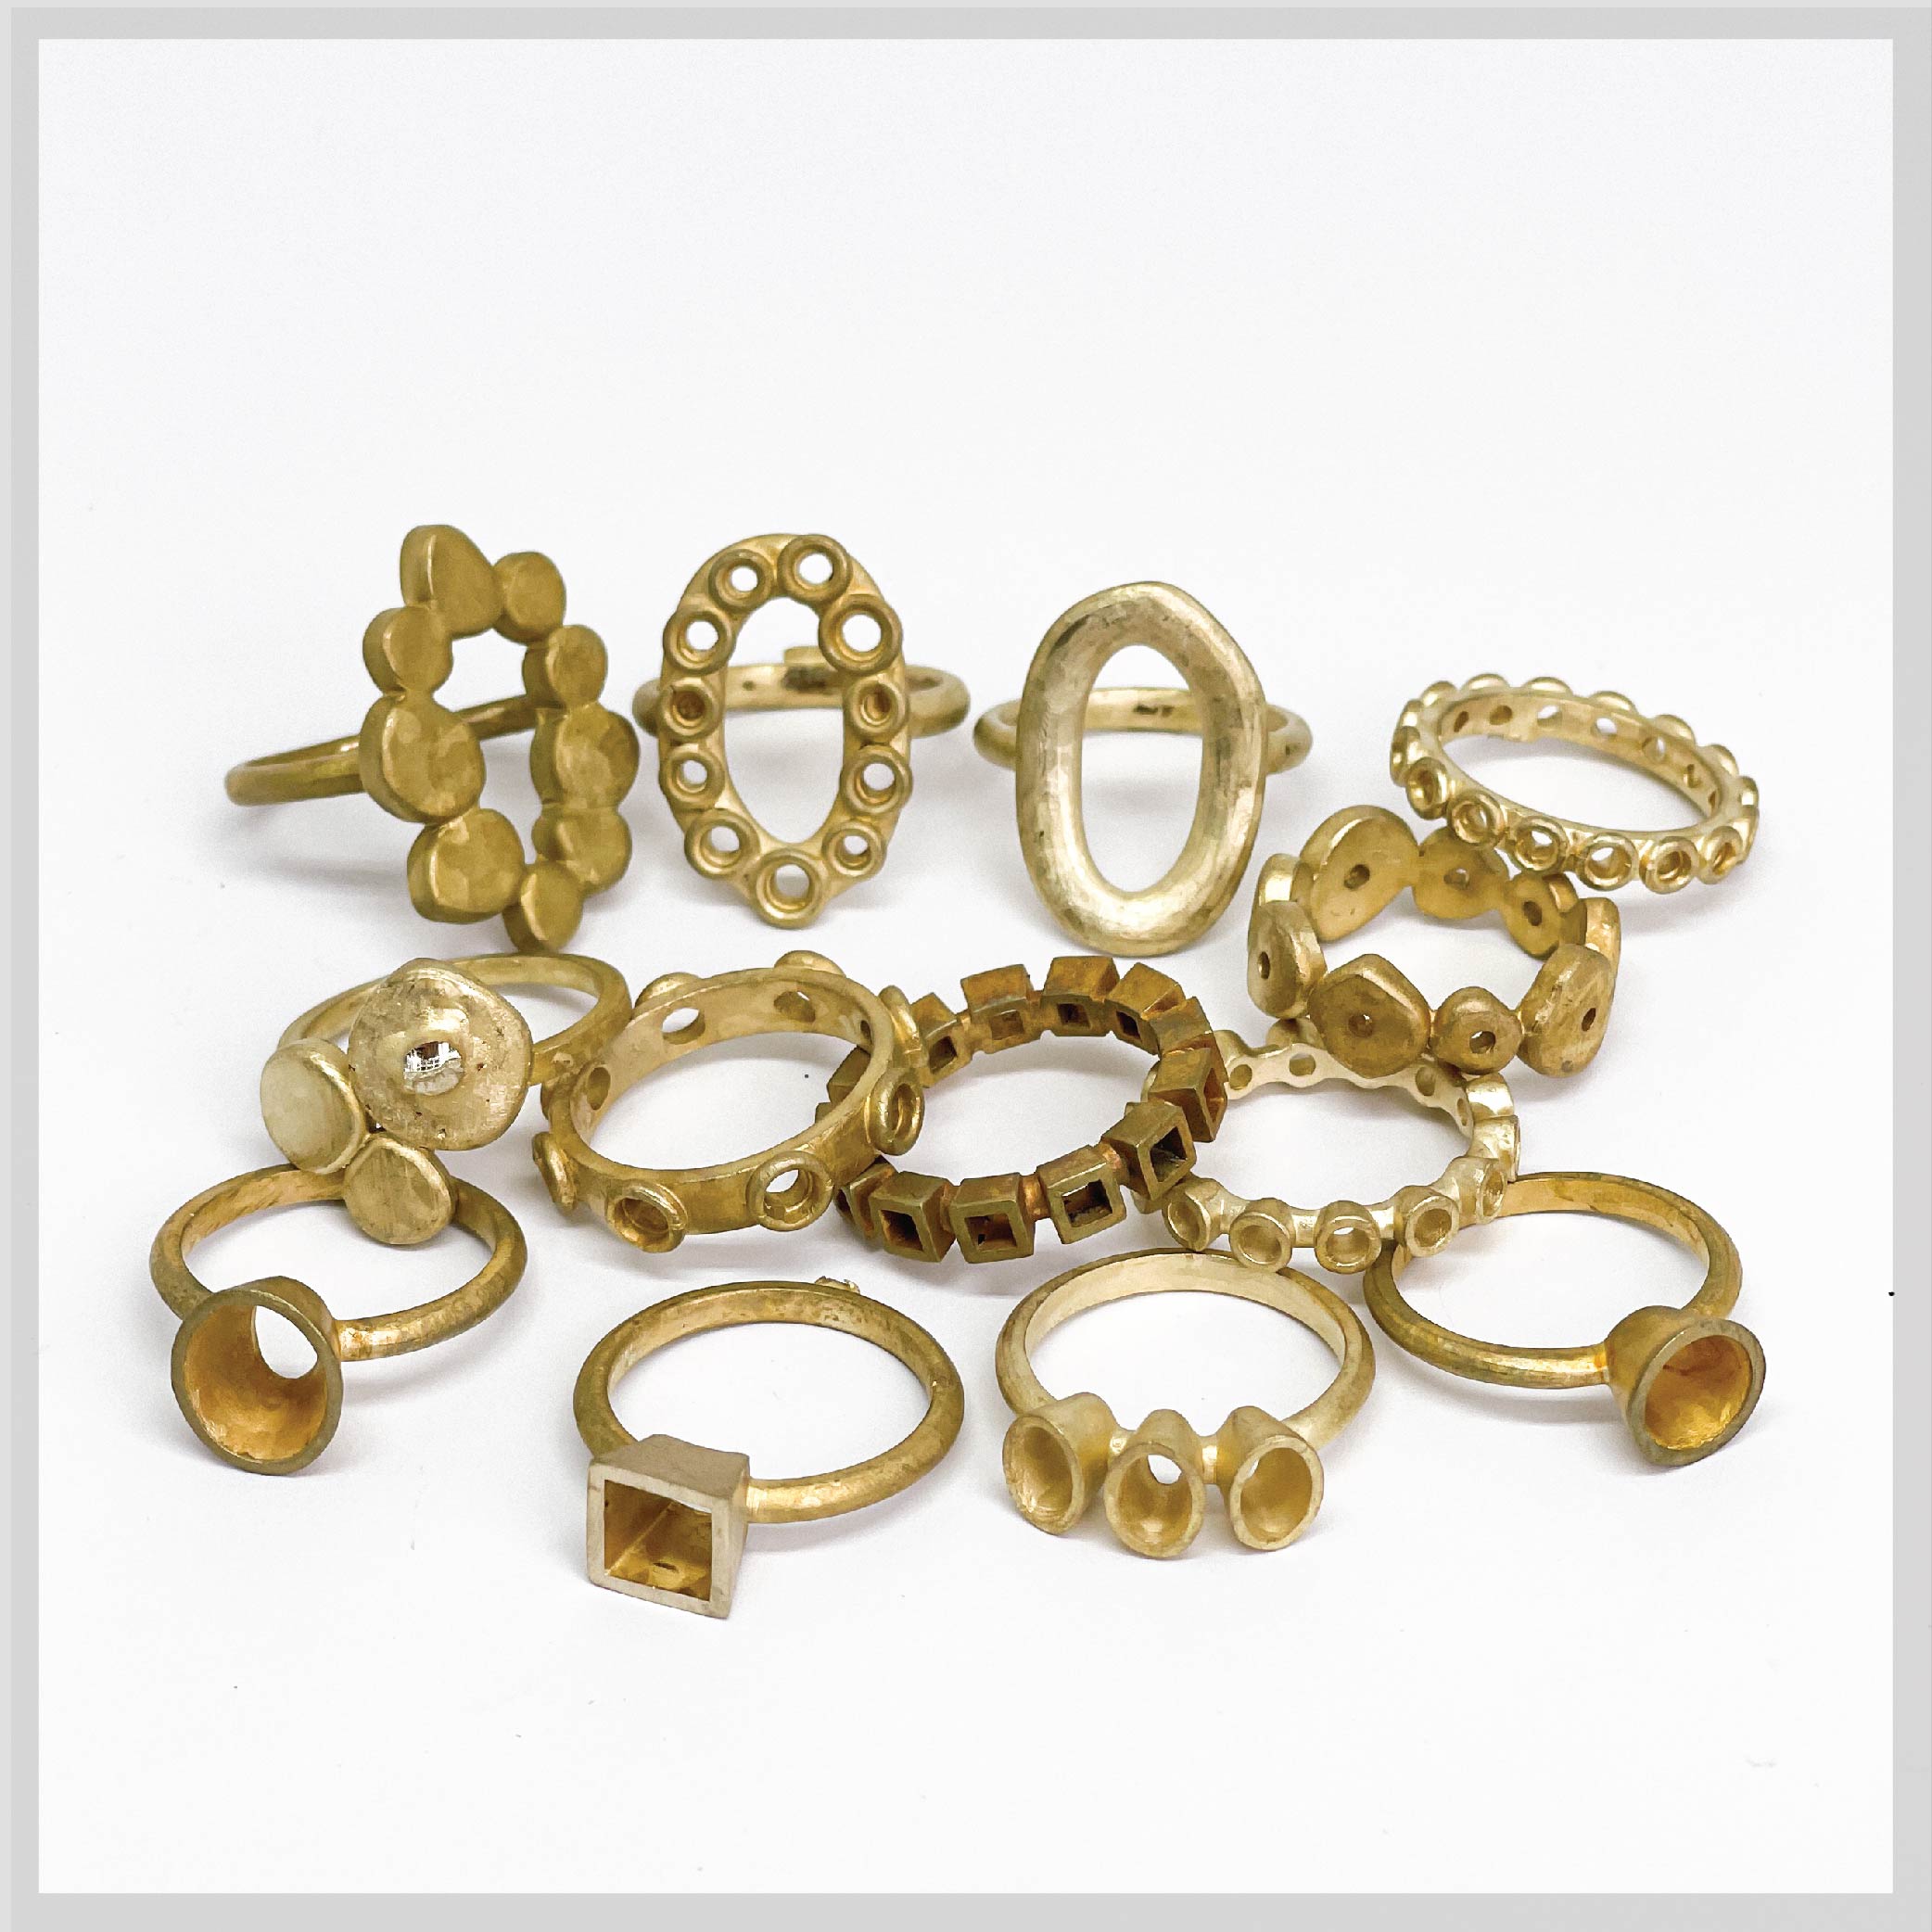 Brass rings for practice stone setting